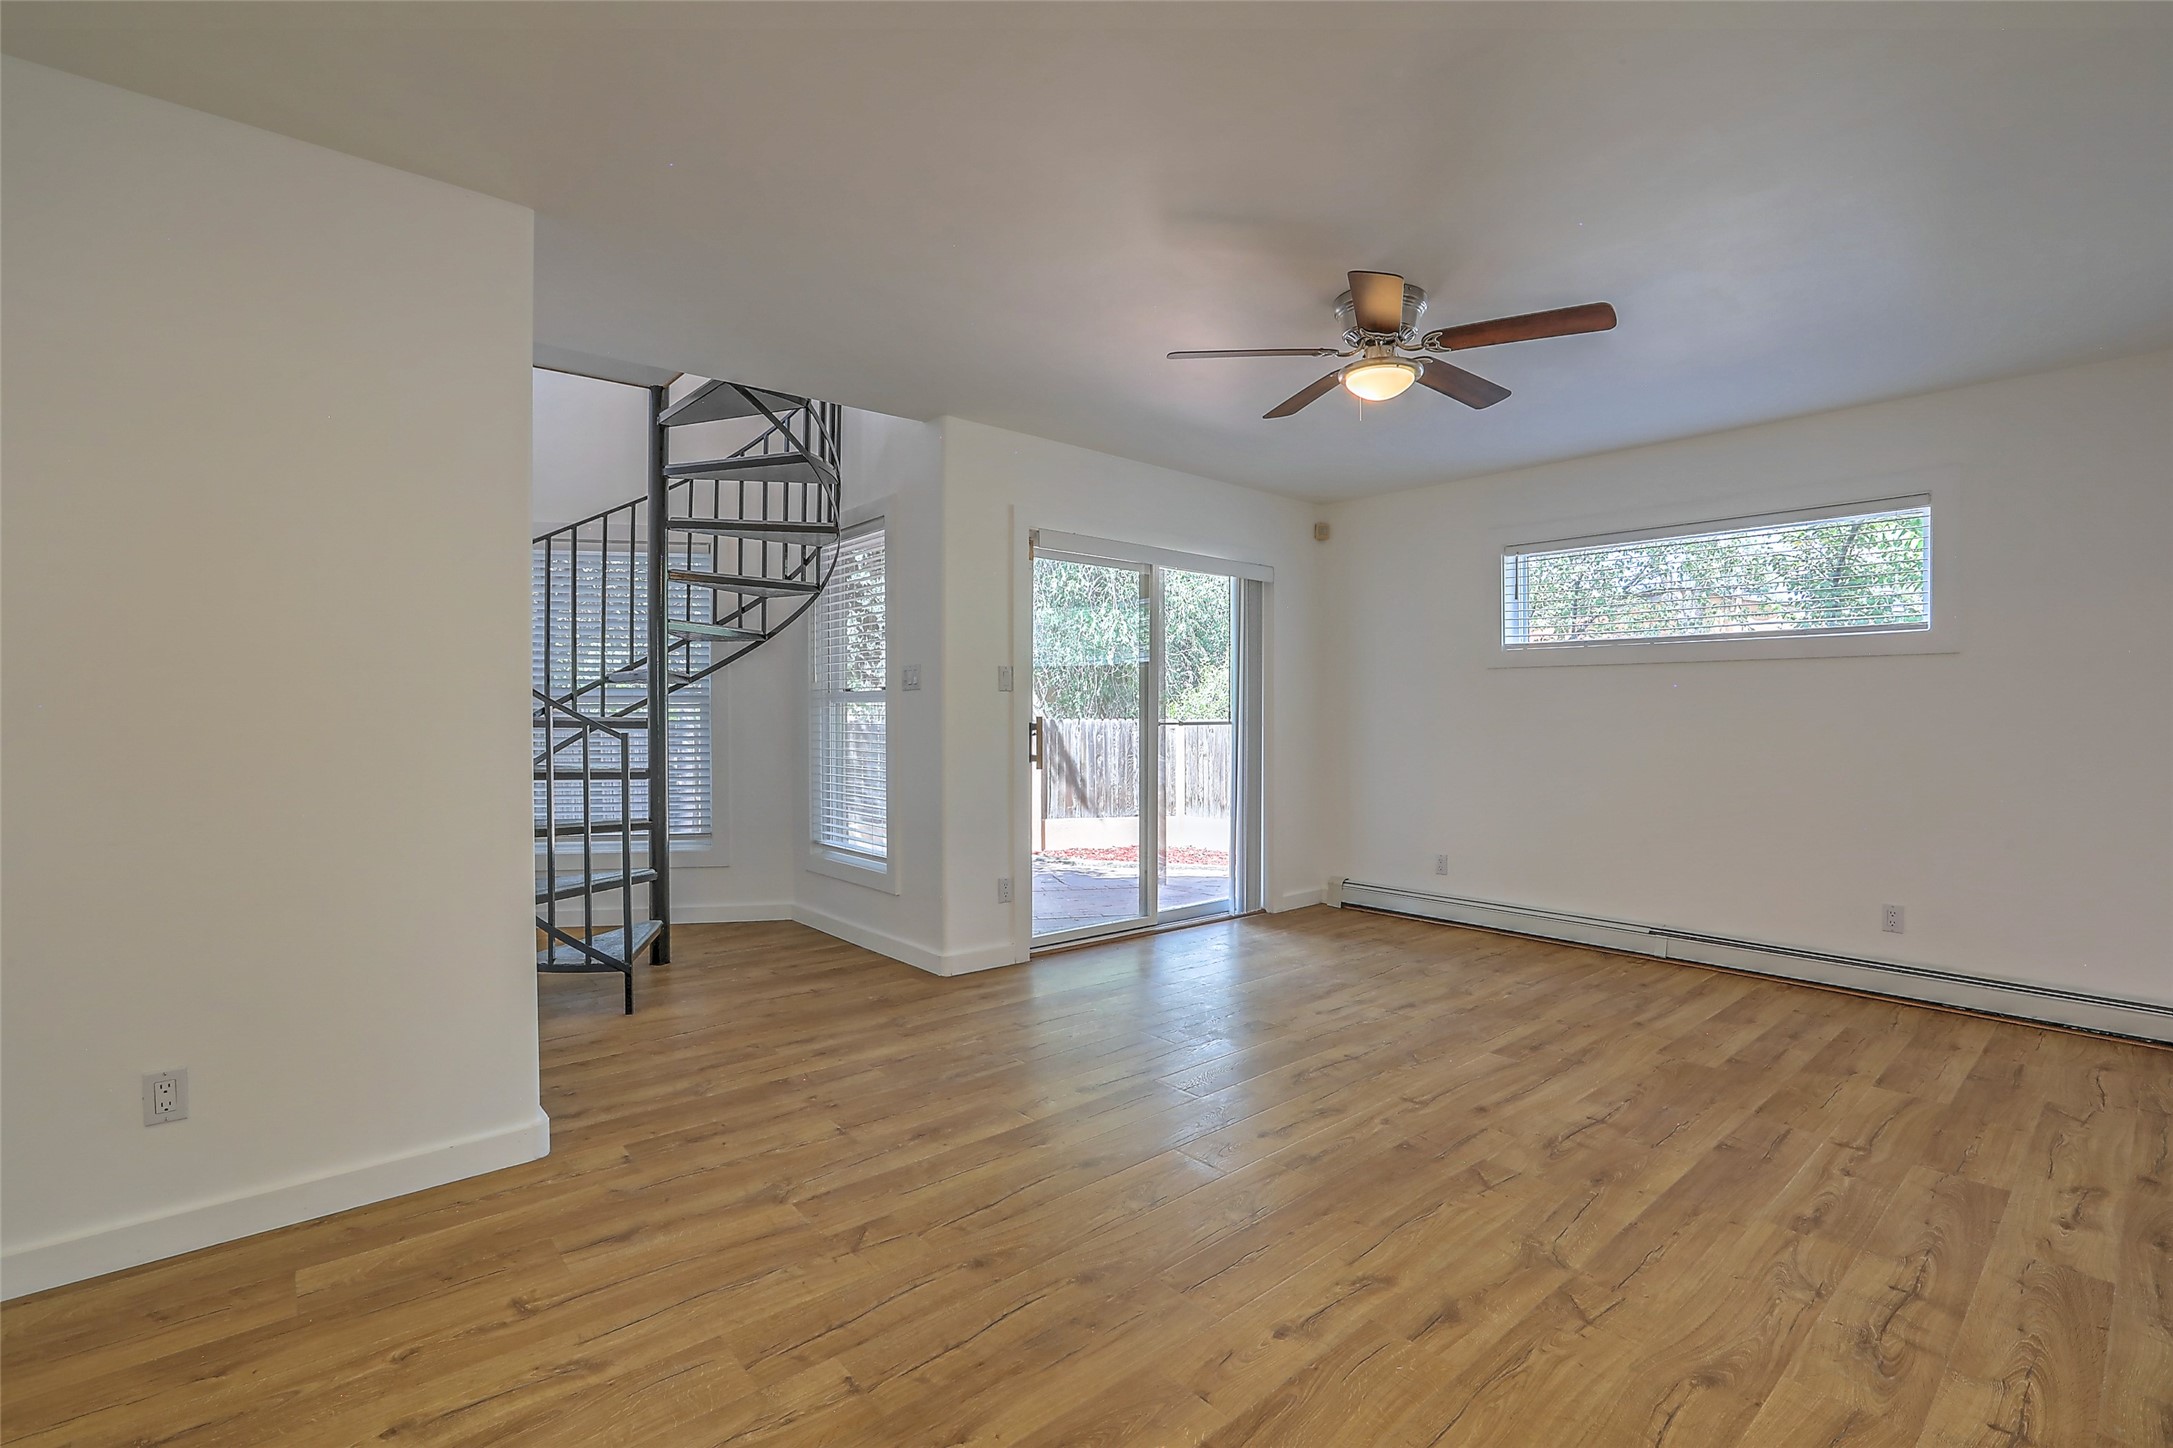 347 E Berger St., Santa Fe, New Mexico 87505, 5 Bedrooms Bedrooms, ,4 BathroomsBathrooms,Residential,For Sale,347 E Berger St.,202341037